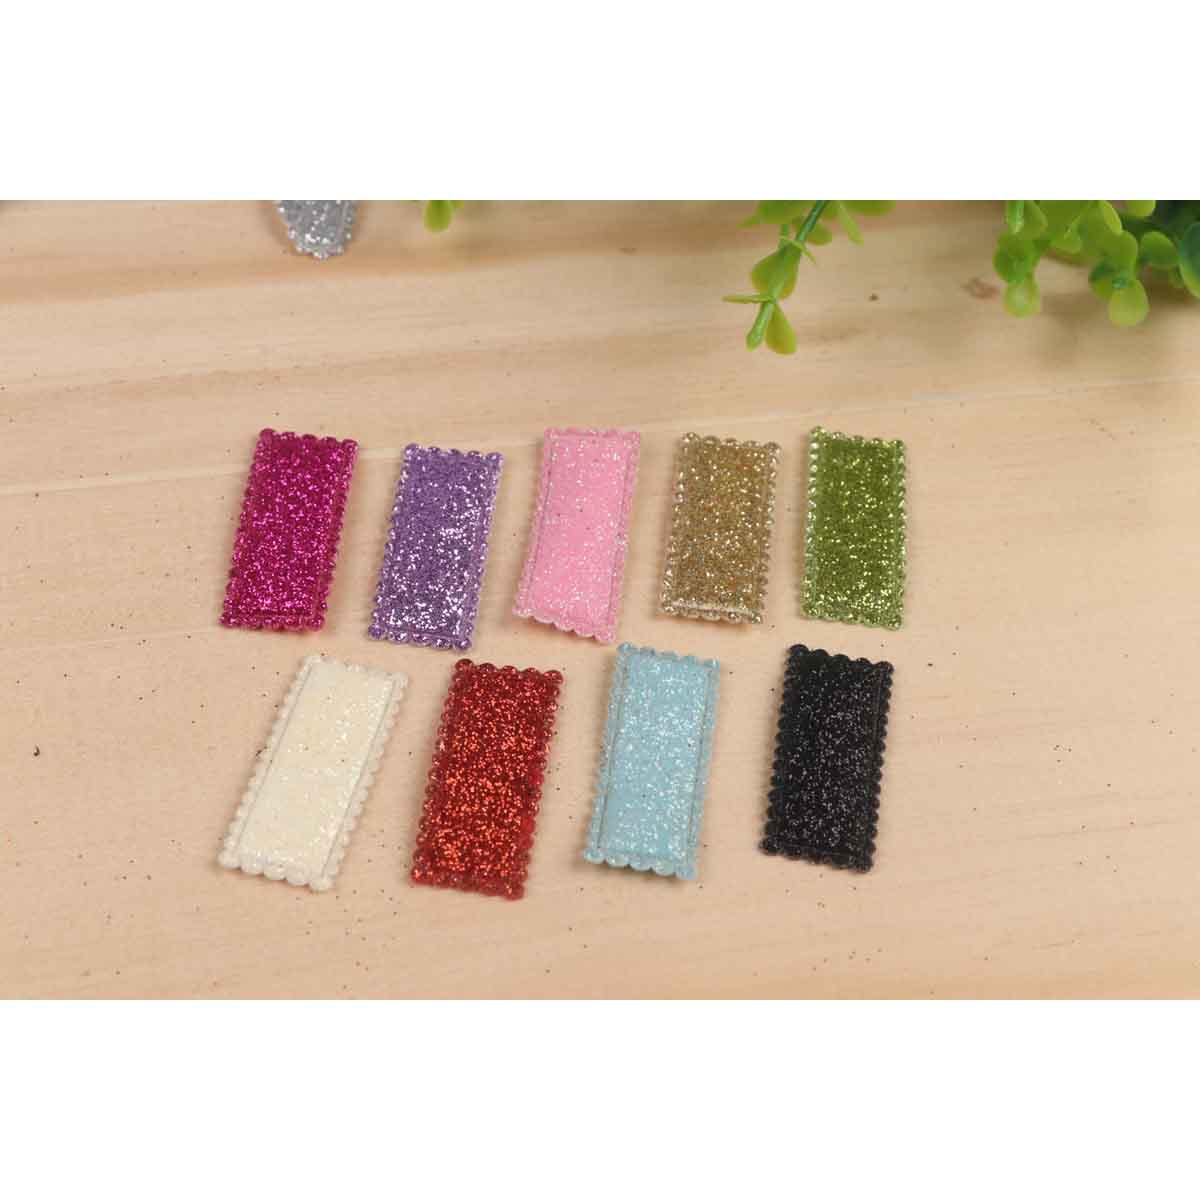 90 Glitter Hair Clip Covers 35mm-9 Colors